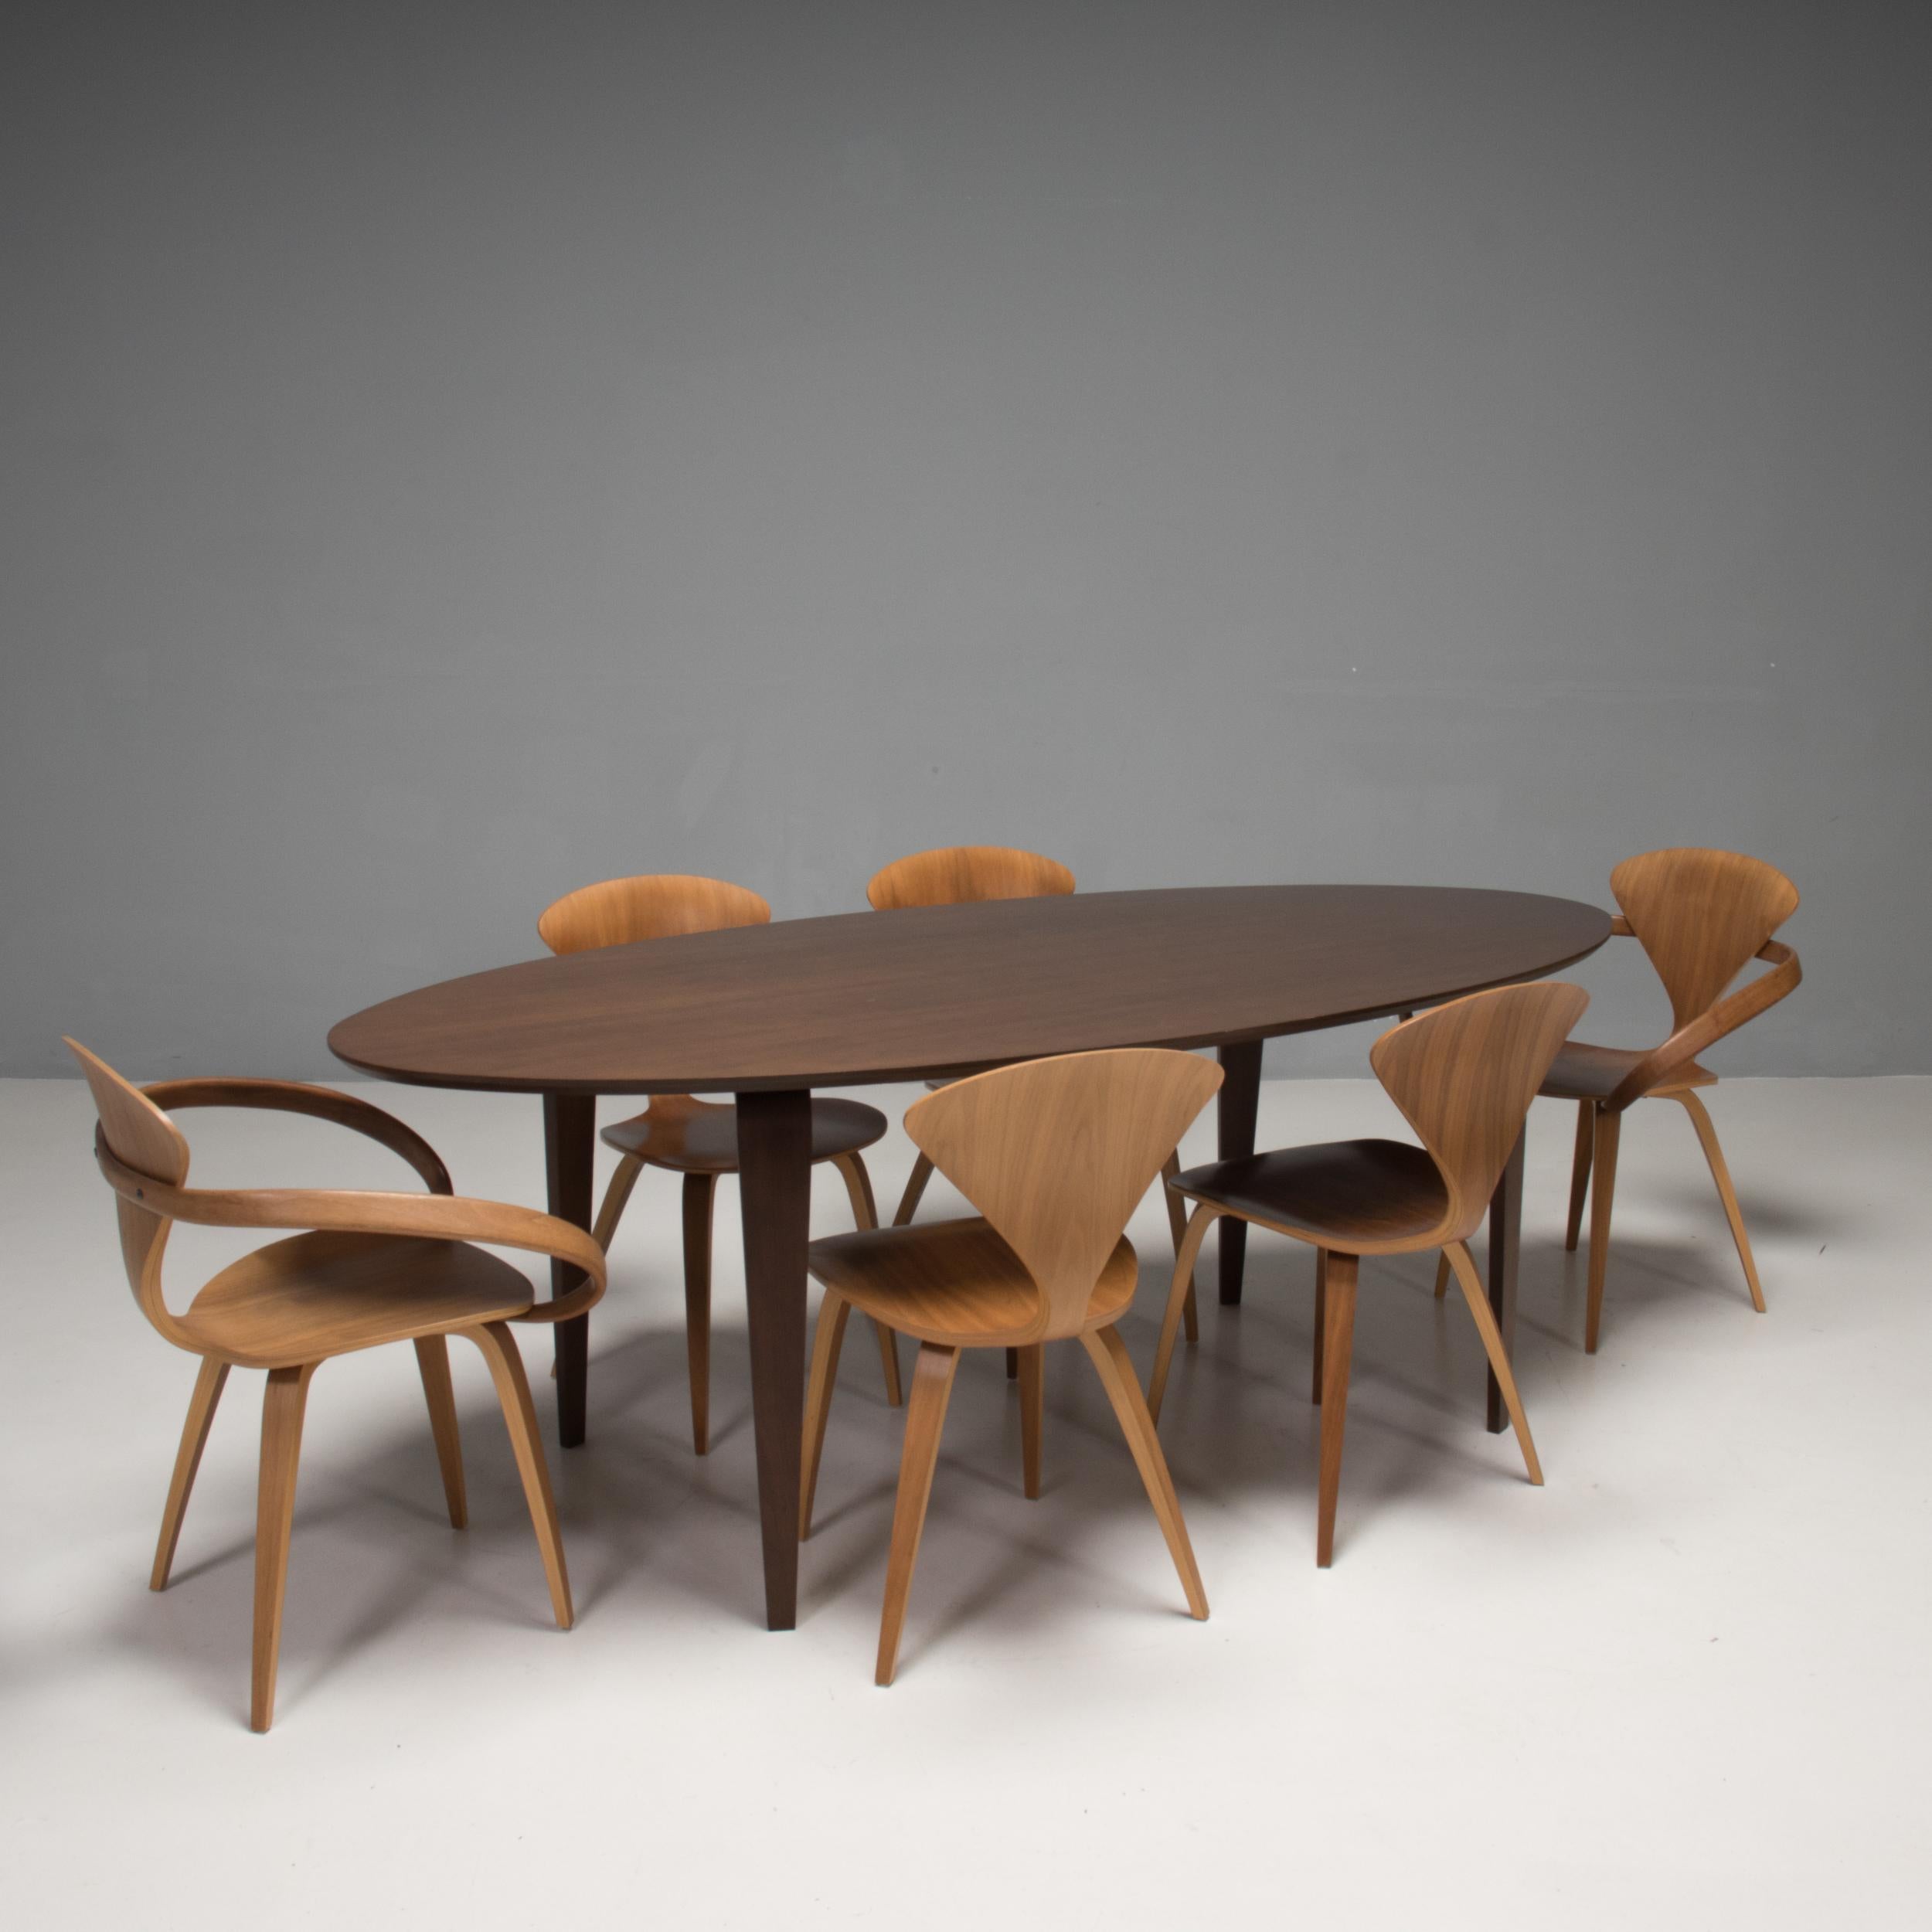 American Cherner Classic Walnut Oval Dining Table and Set of 6 Chairs, 2013